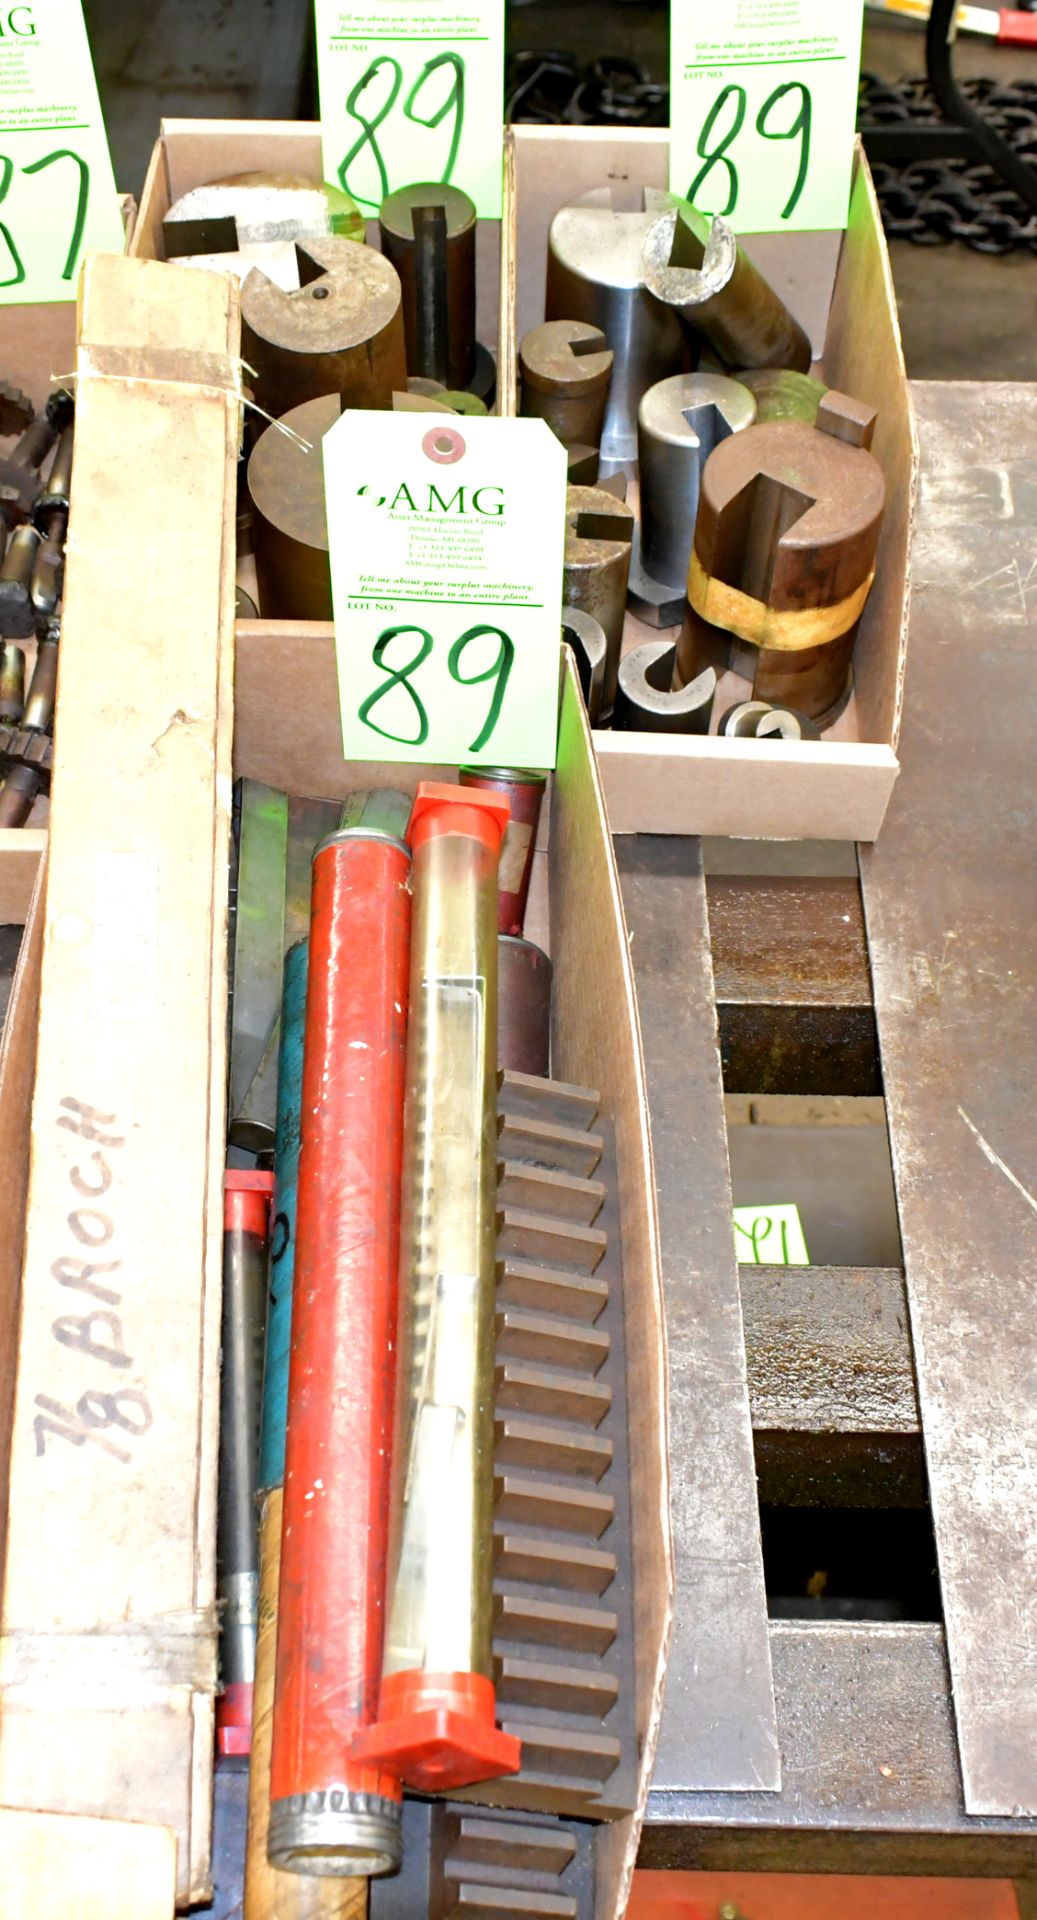 Lot-Broaching Tooling in (3) Boxes